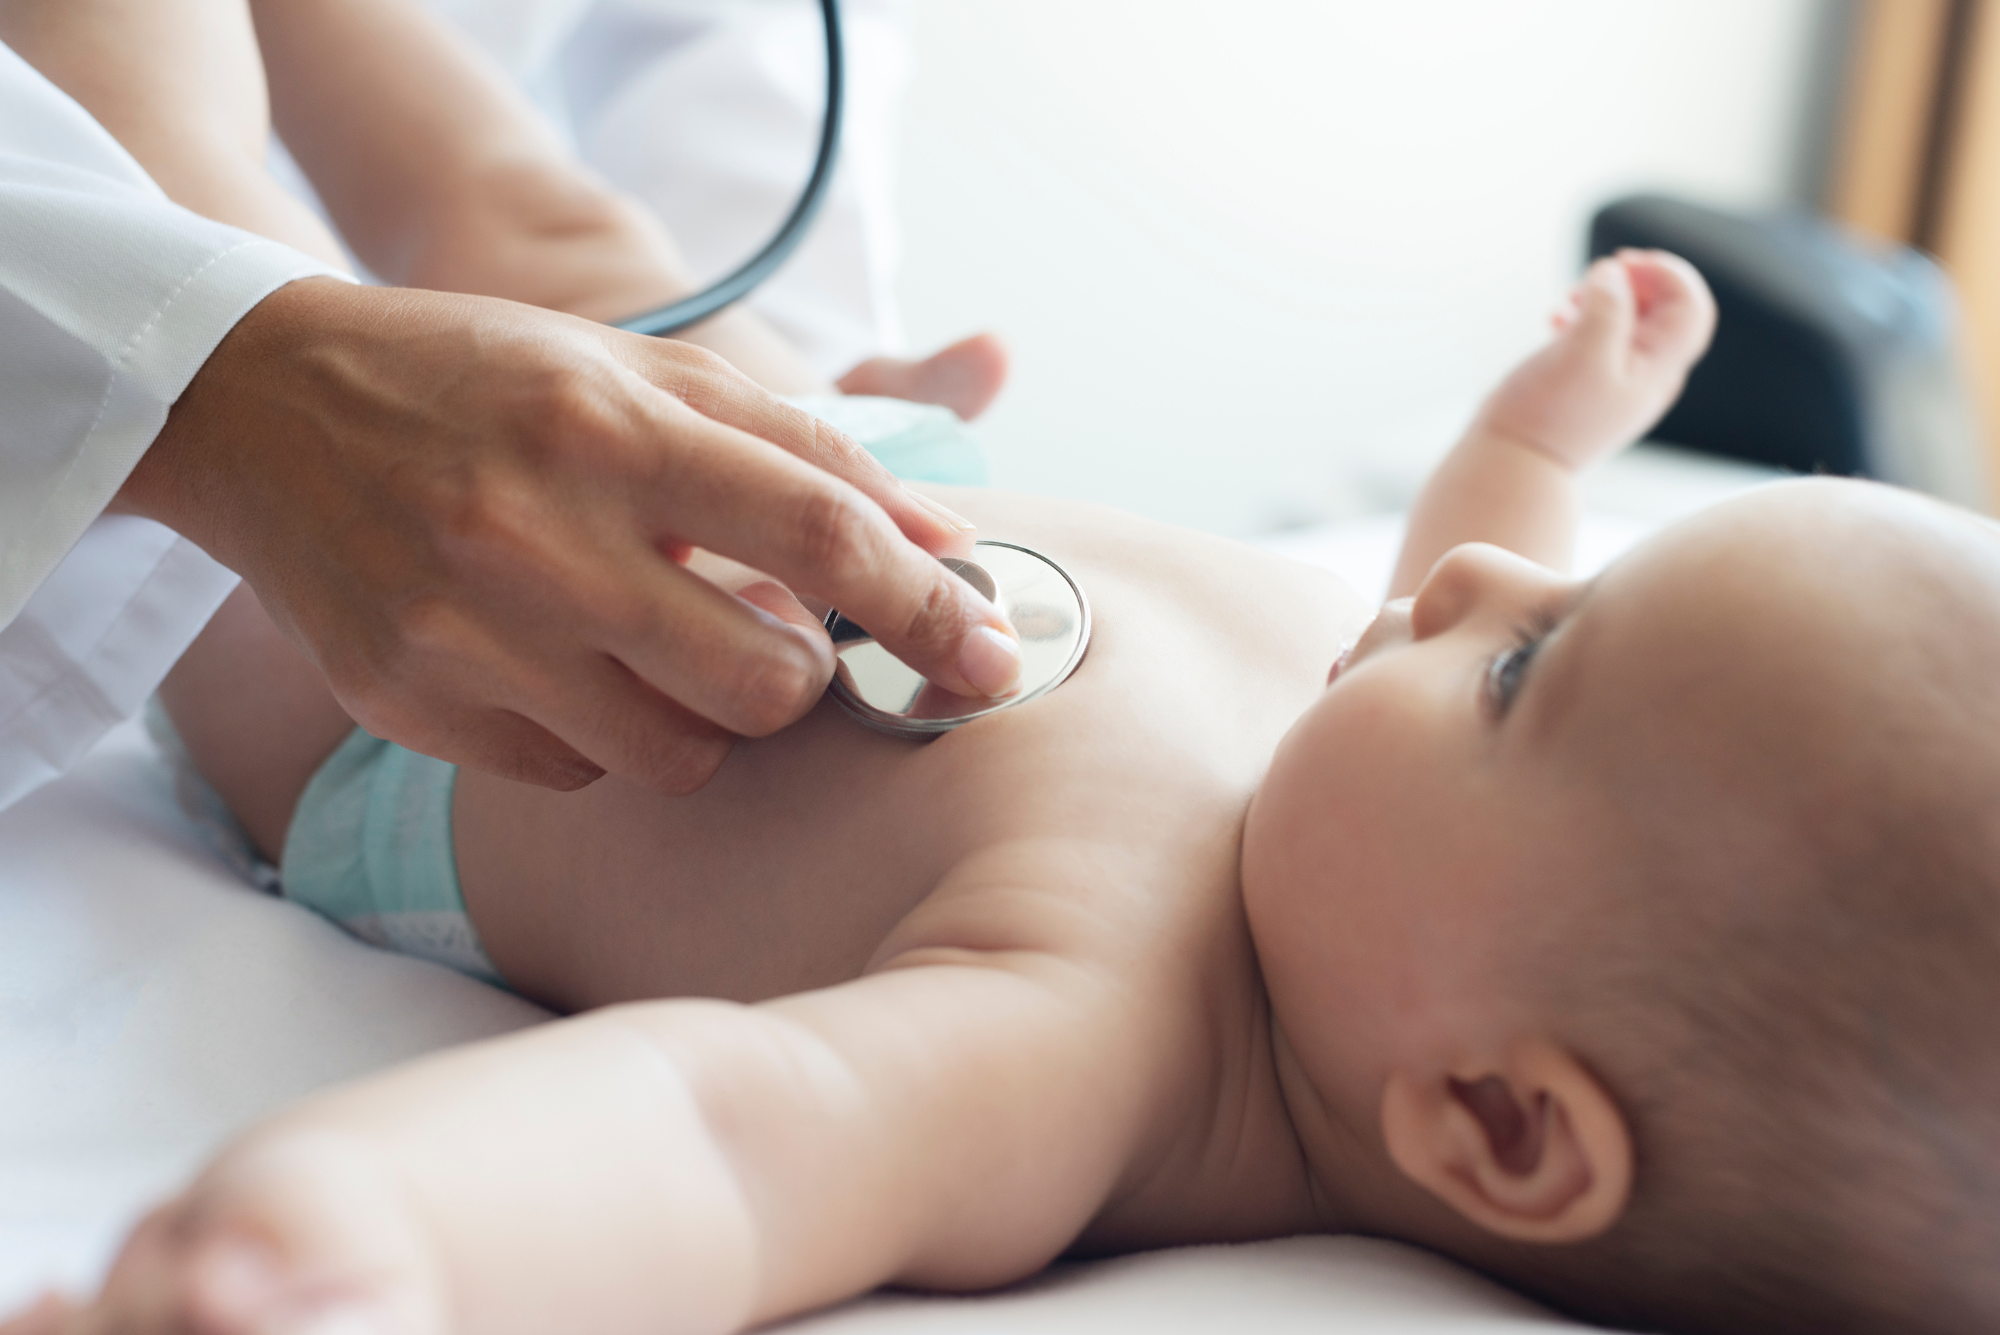 Baby on an exam table having chest examined by a doctor using a stethoscope. Click to view article, Health Officials Urge Precautions as Pediatric RSV Hospitalizations Increase